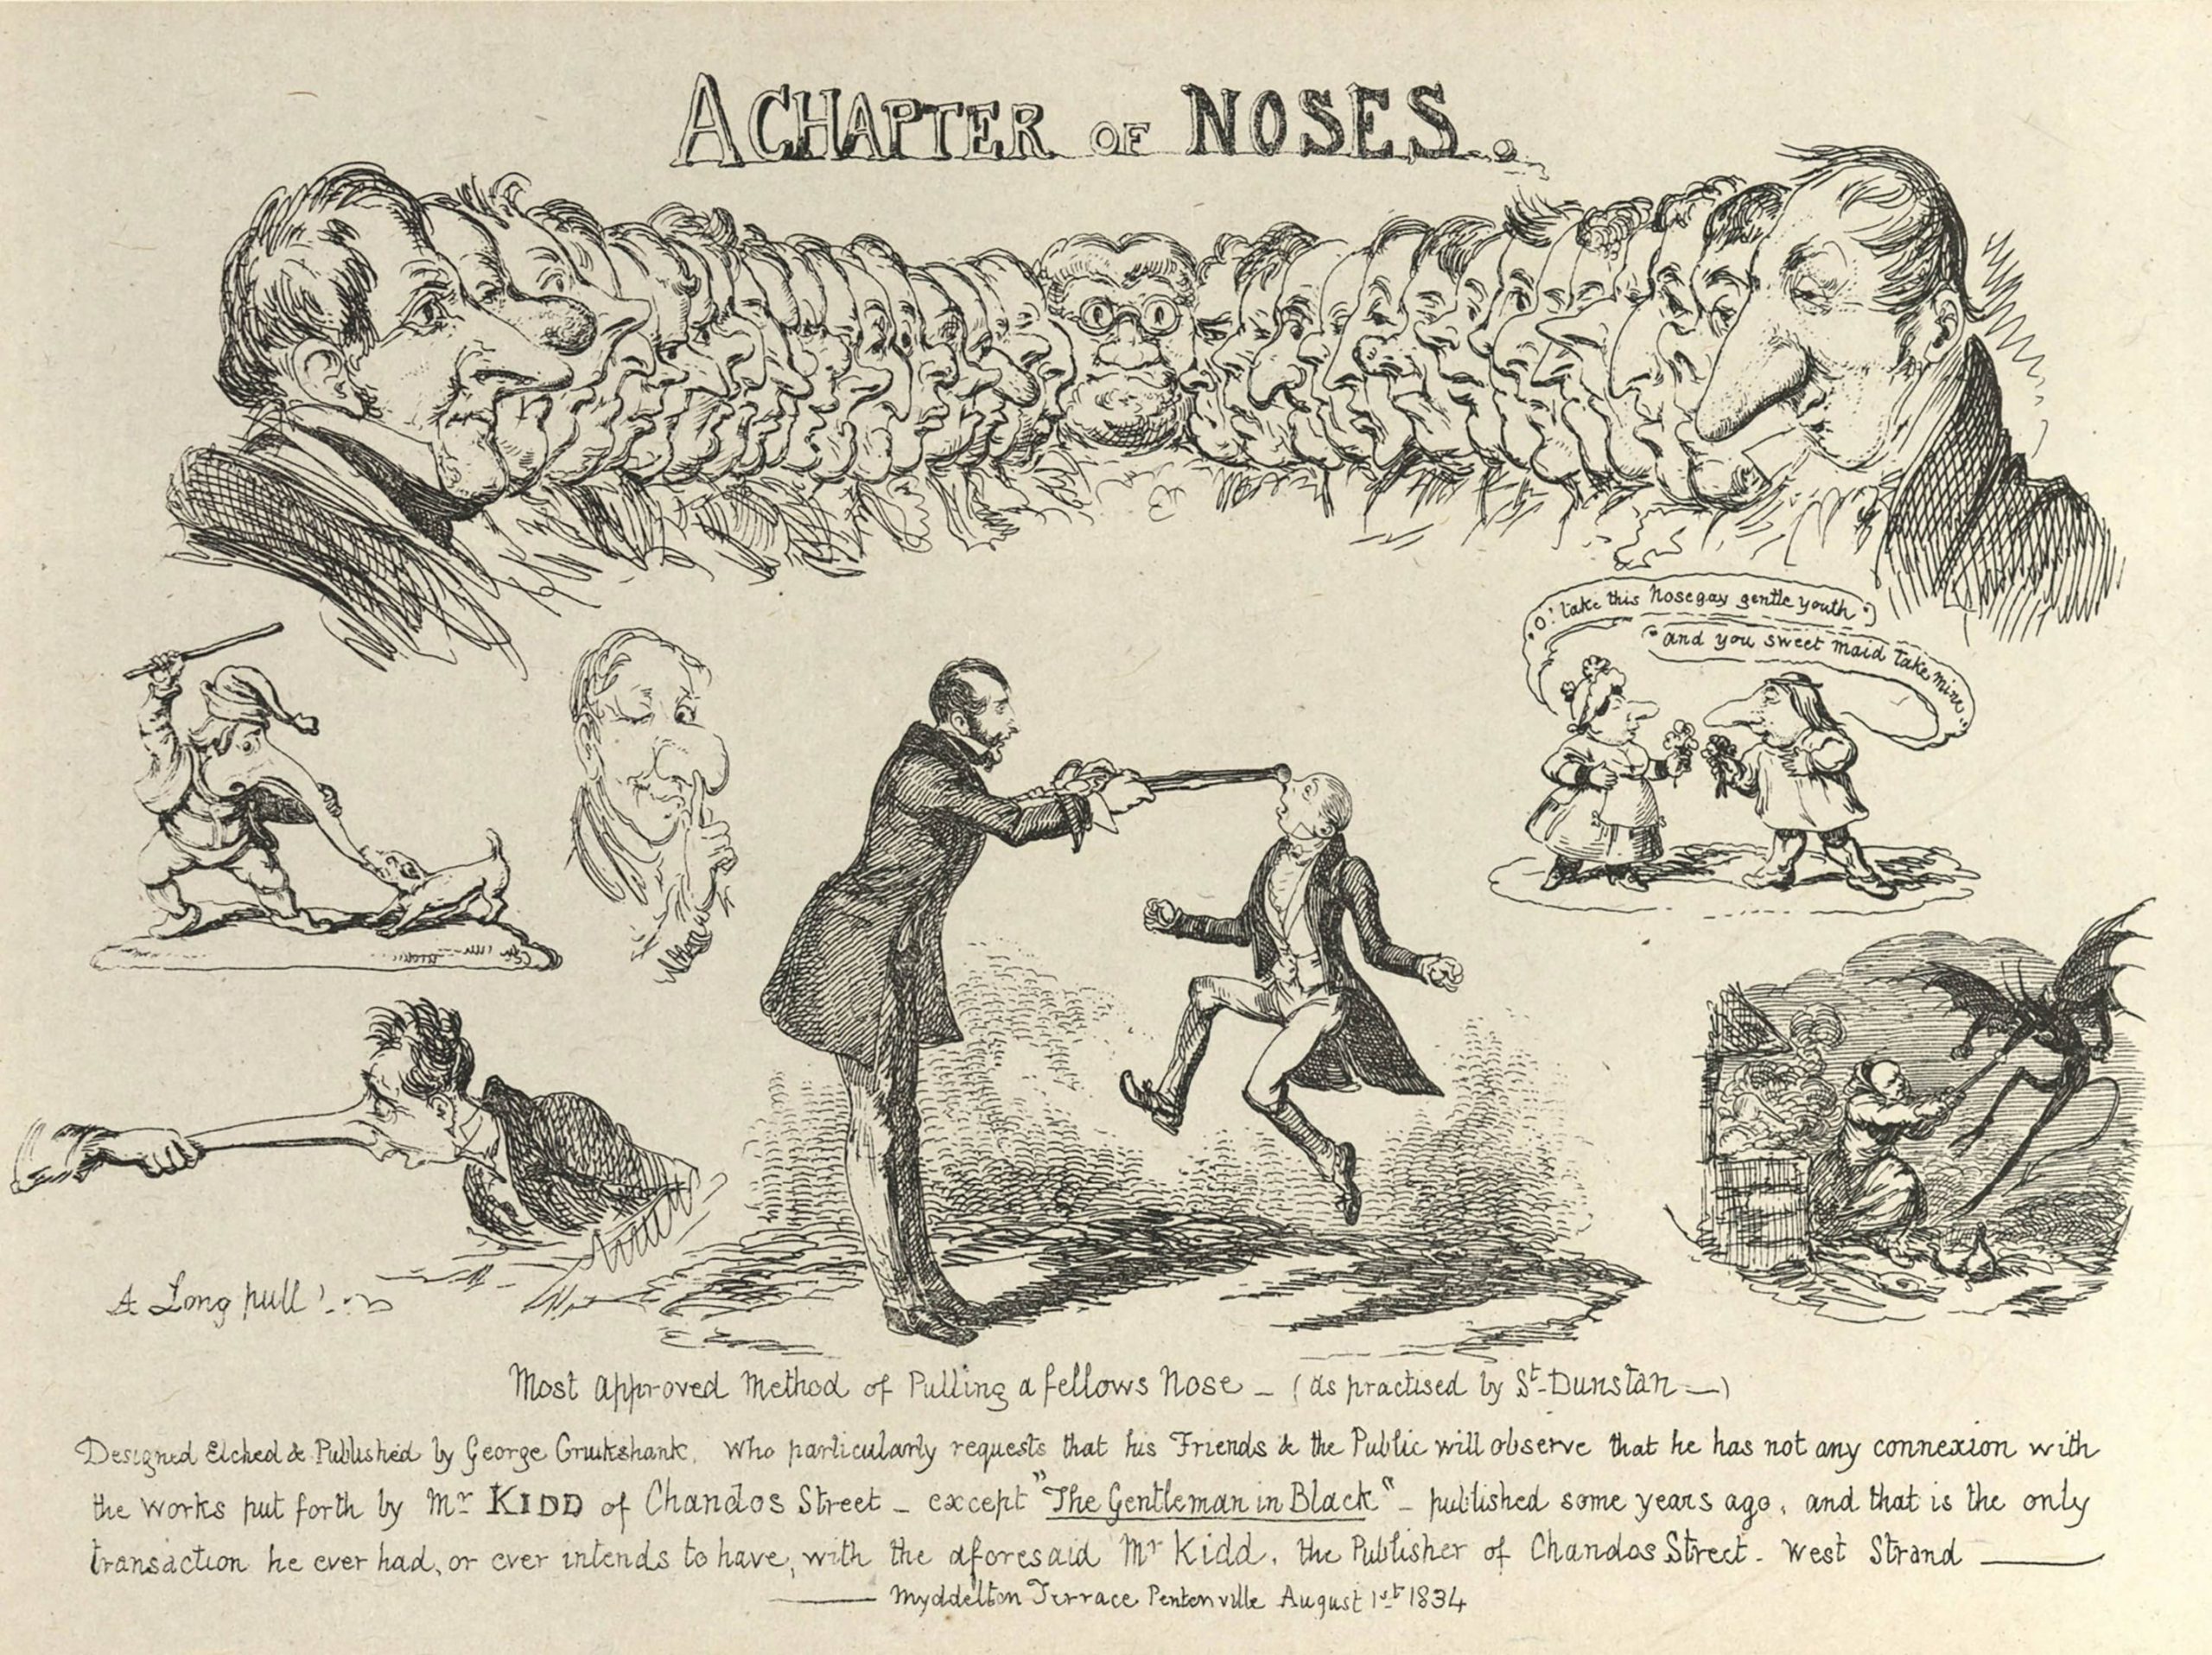 A series of sketches featuring mean with exaggerated noses and various shaped noses. The top image is a series of mean lined up in profile with their nose shapes on prominent display. In another image, a man's nose is being pulled, another is having his nose tugged by pliers. 